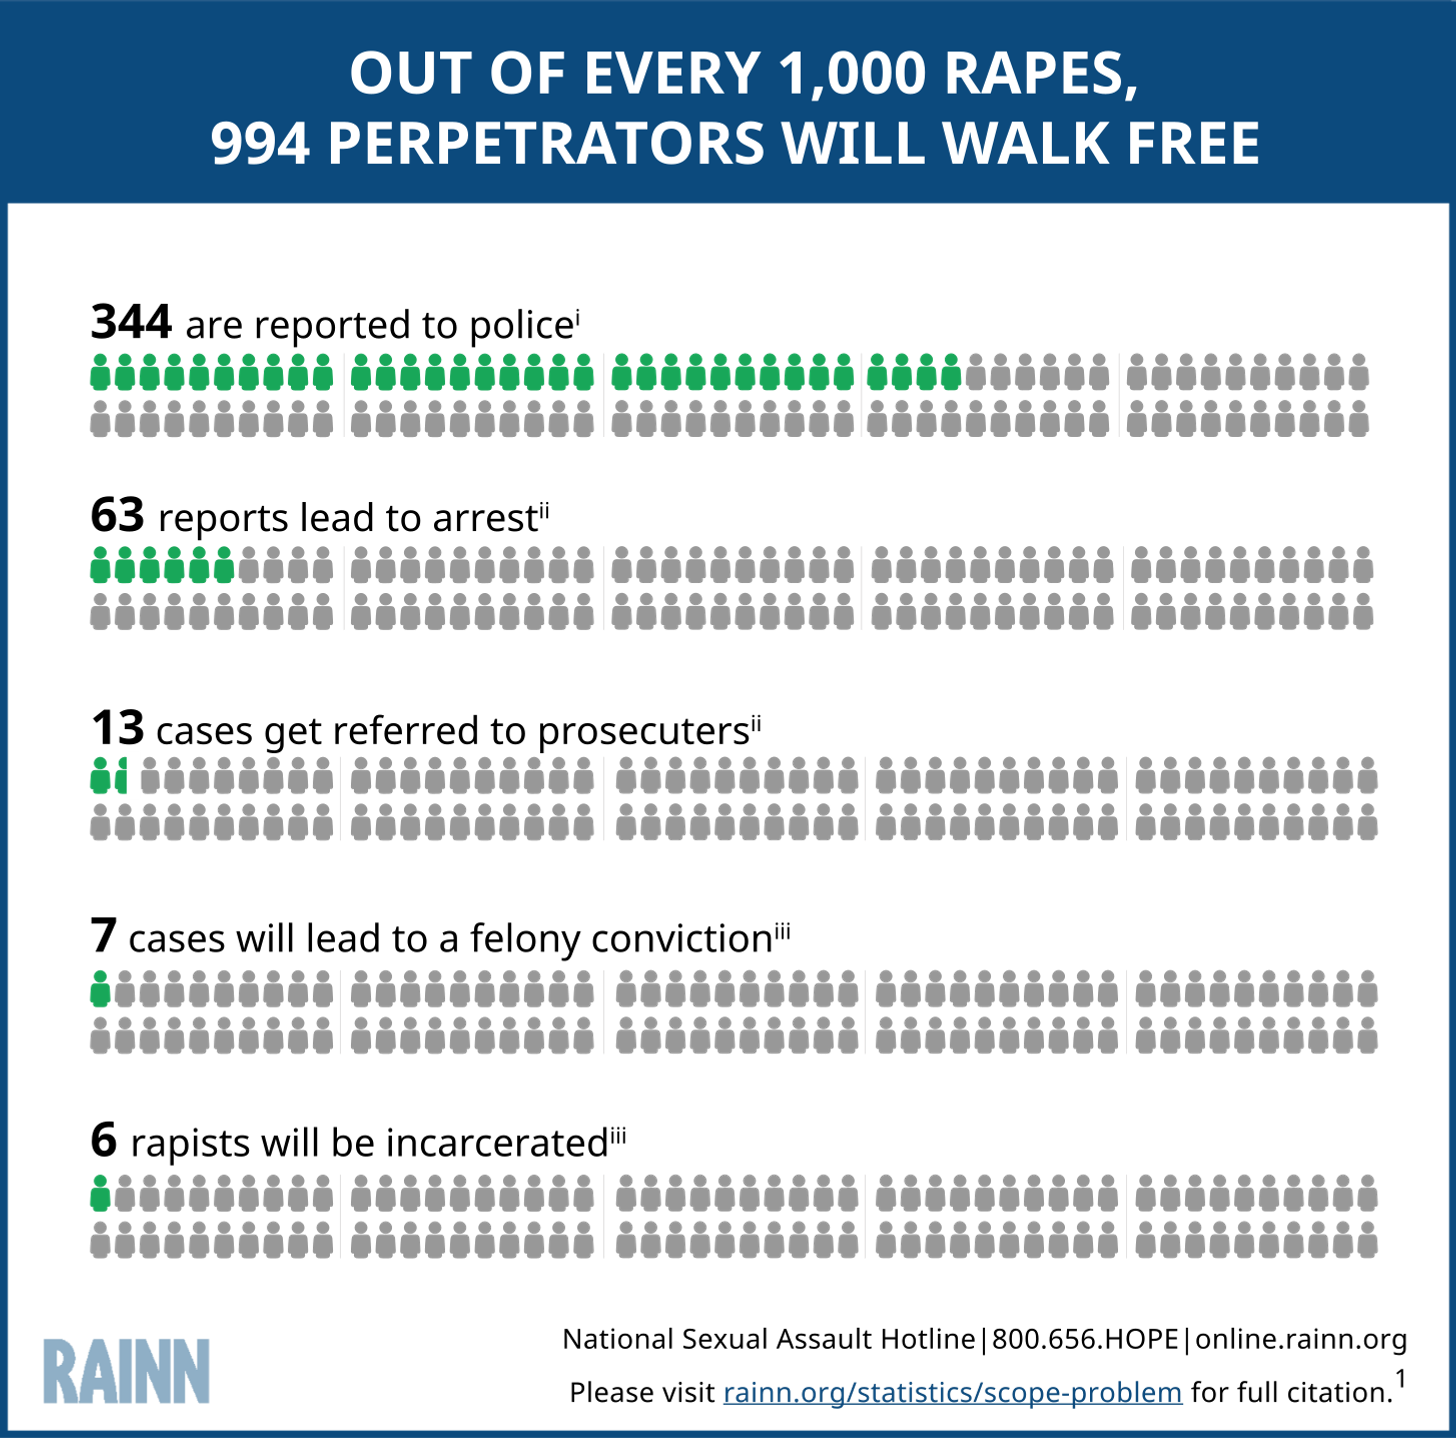 Graphic demonstrating that out of 1000 rapes, 994 perpetrators will walk free